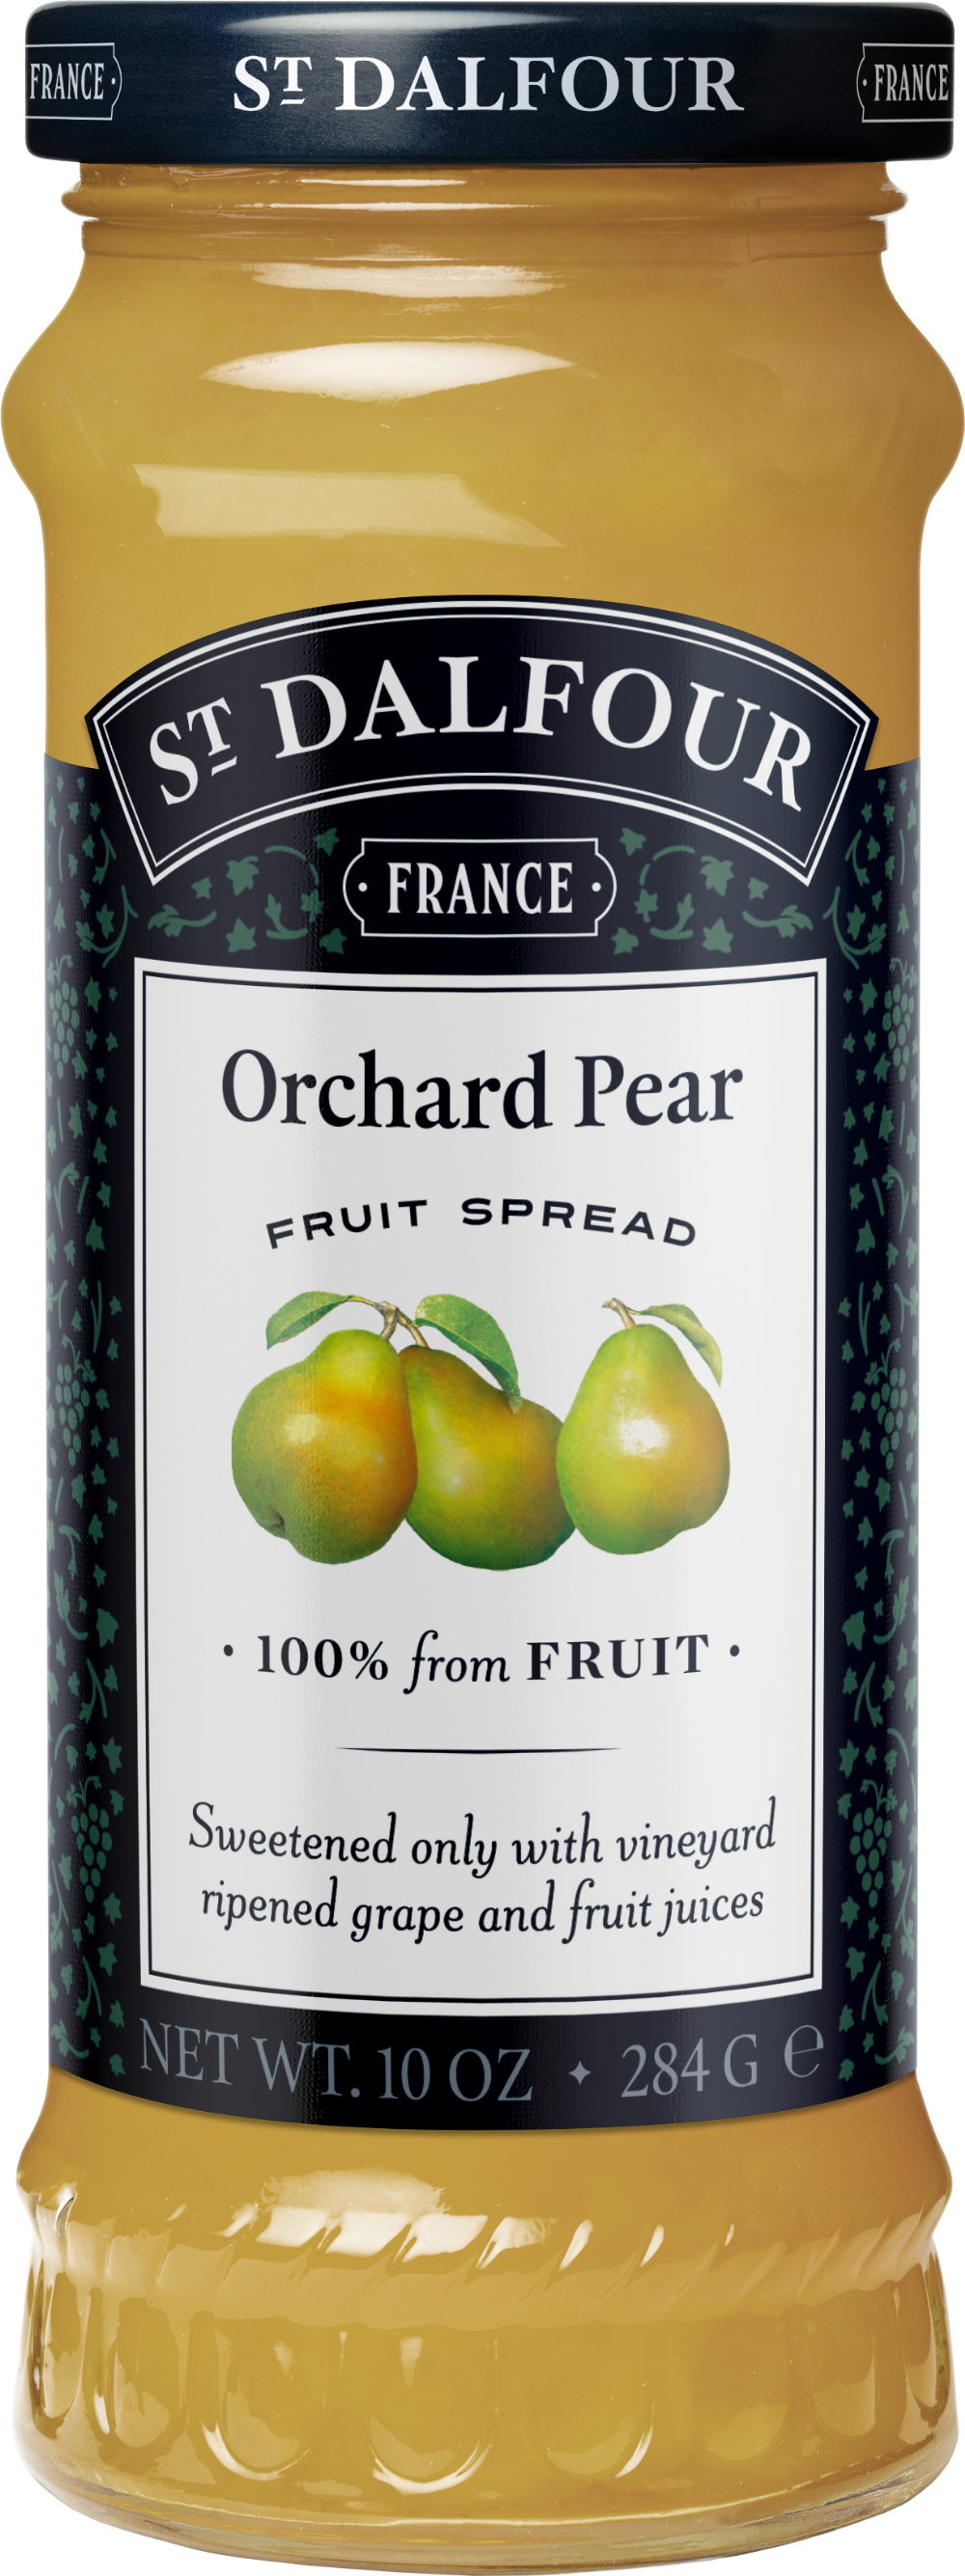 ST DALFOUR Orchard Pear Fruit Spread 284g